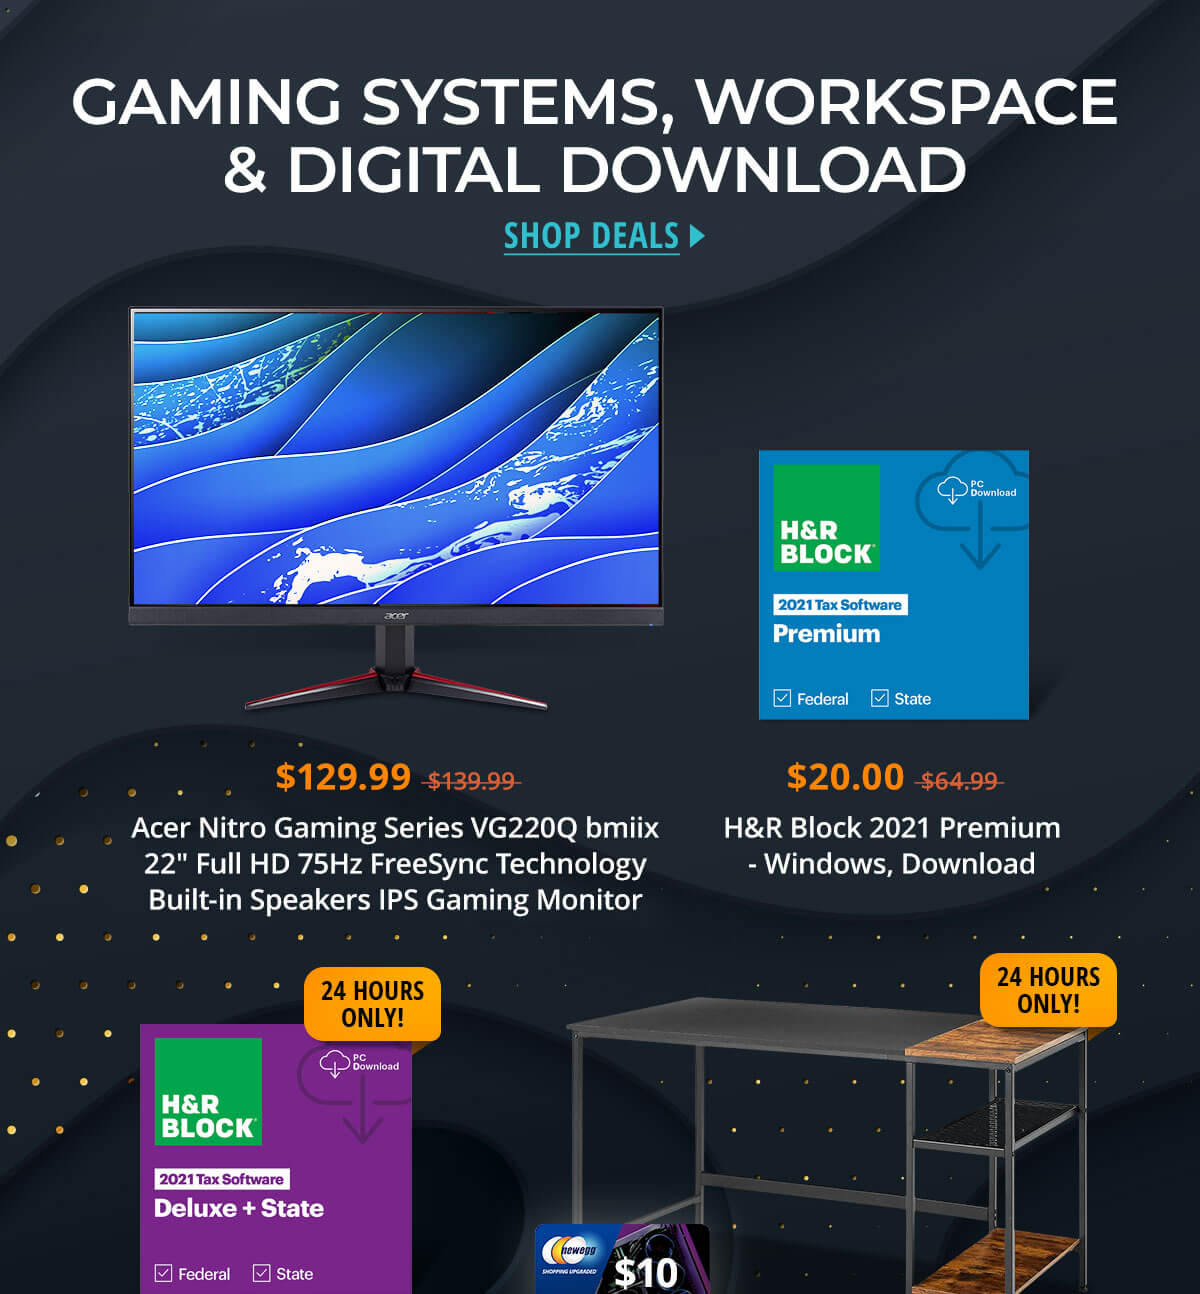 Gaming Systems, Workspace & Digital Downloads